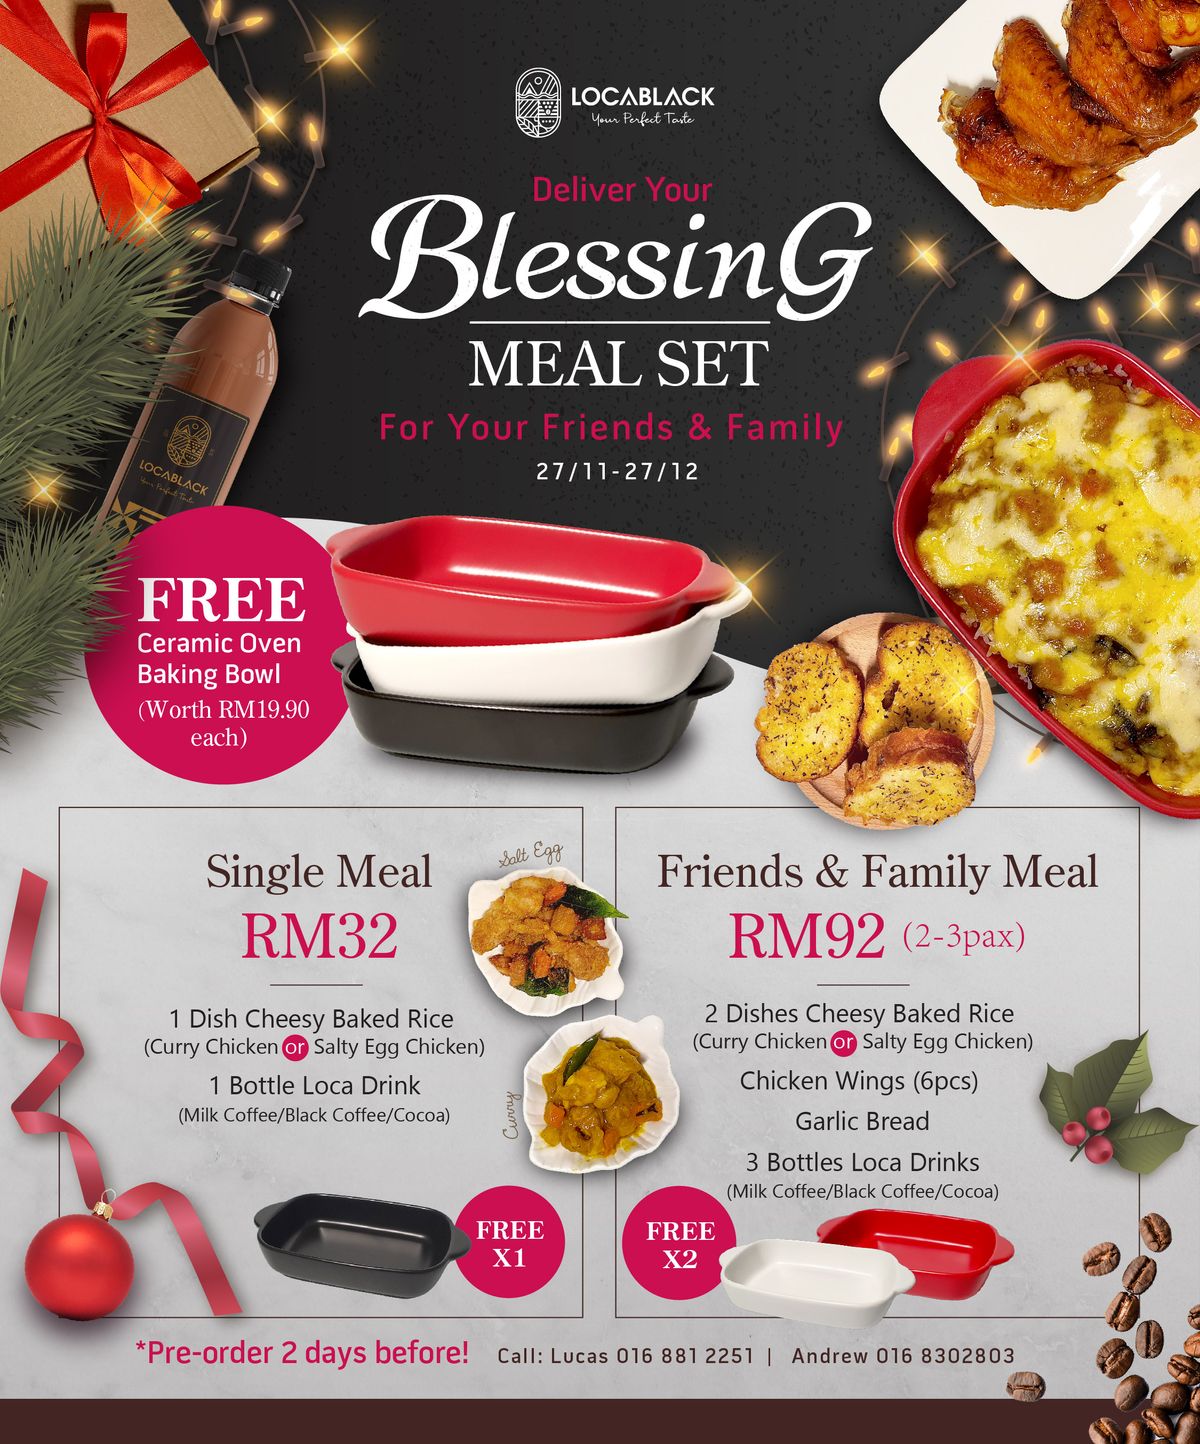 Locablack Christmas Blessing Meal Set